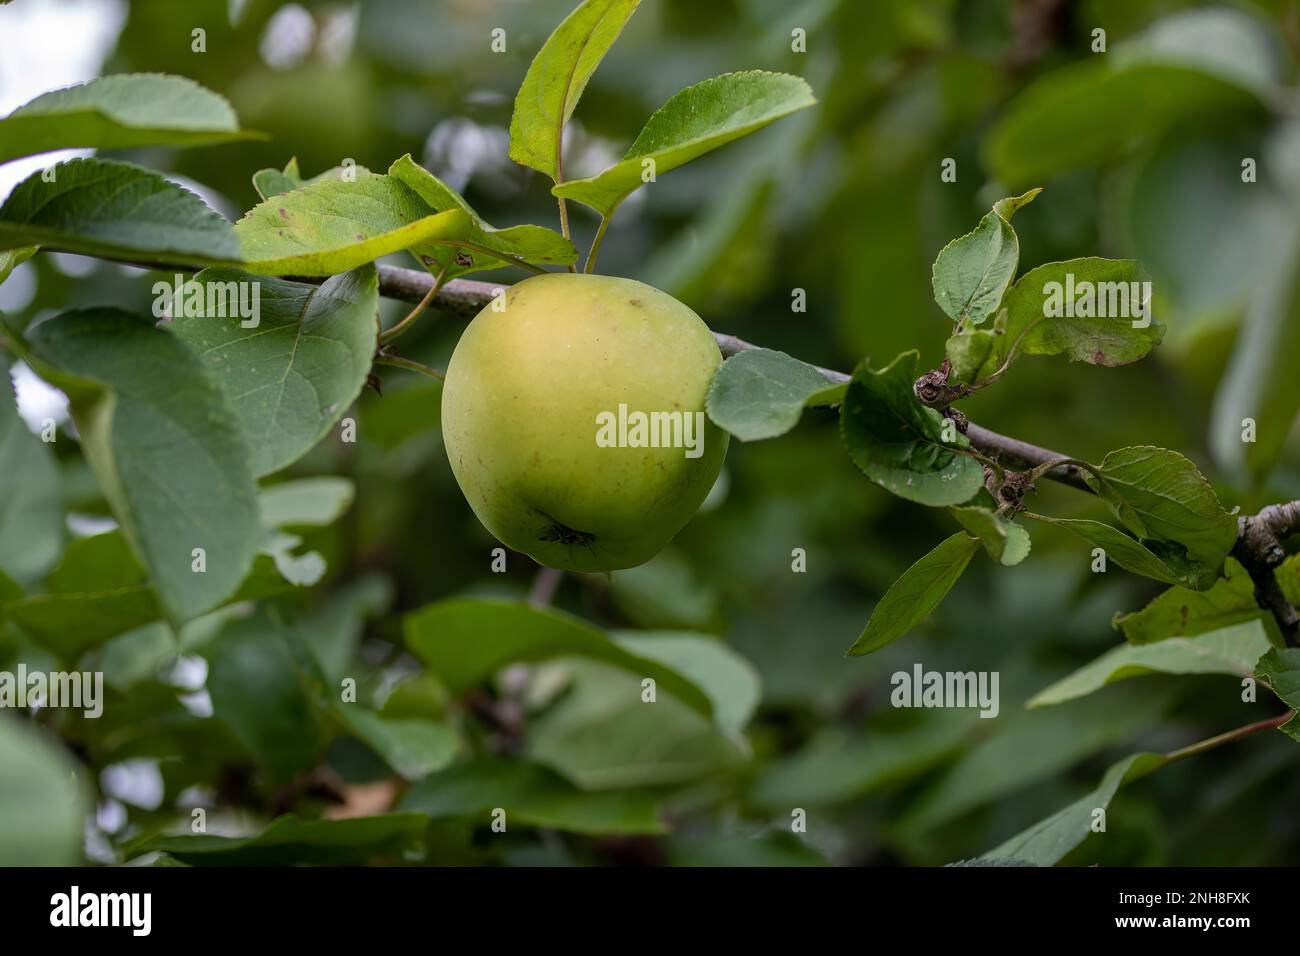 Malus domestica borkh apple growing on a tree with green leaves in the background Stock Photo